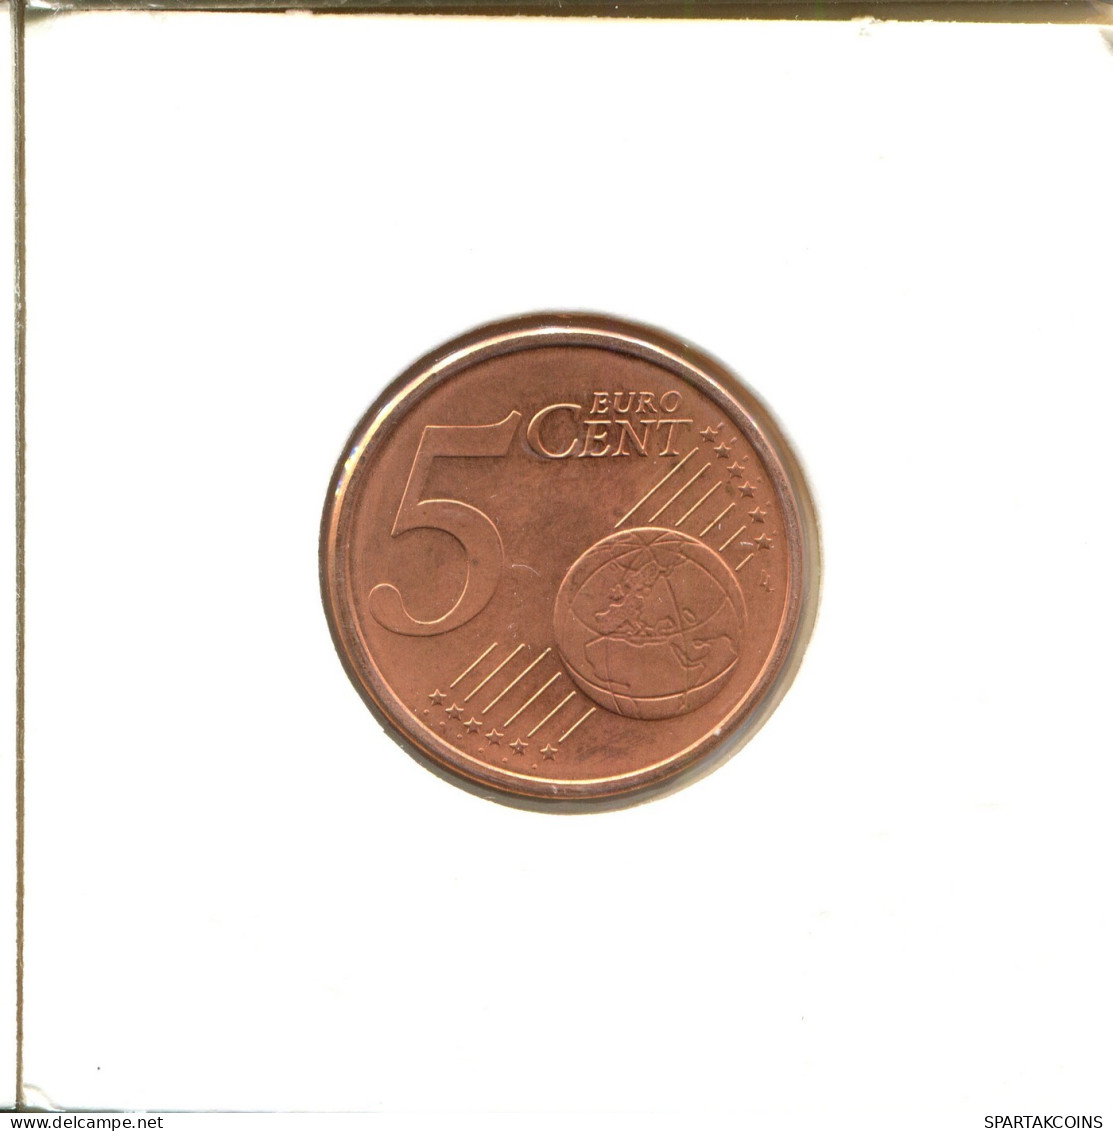 5 EURO CENTS 2007 GERMANY Coin #EU478.U.A - Allemagne